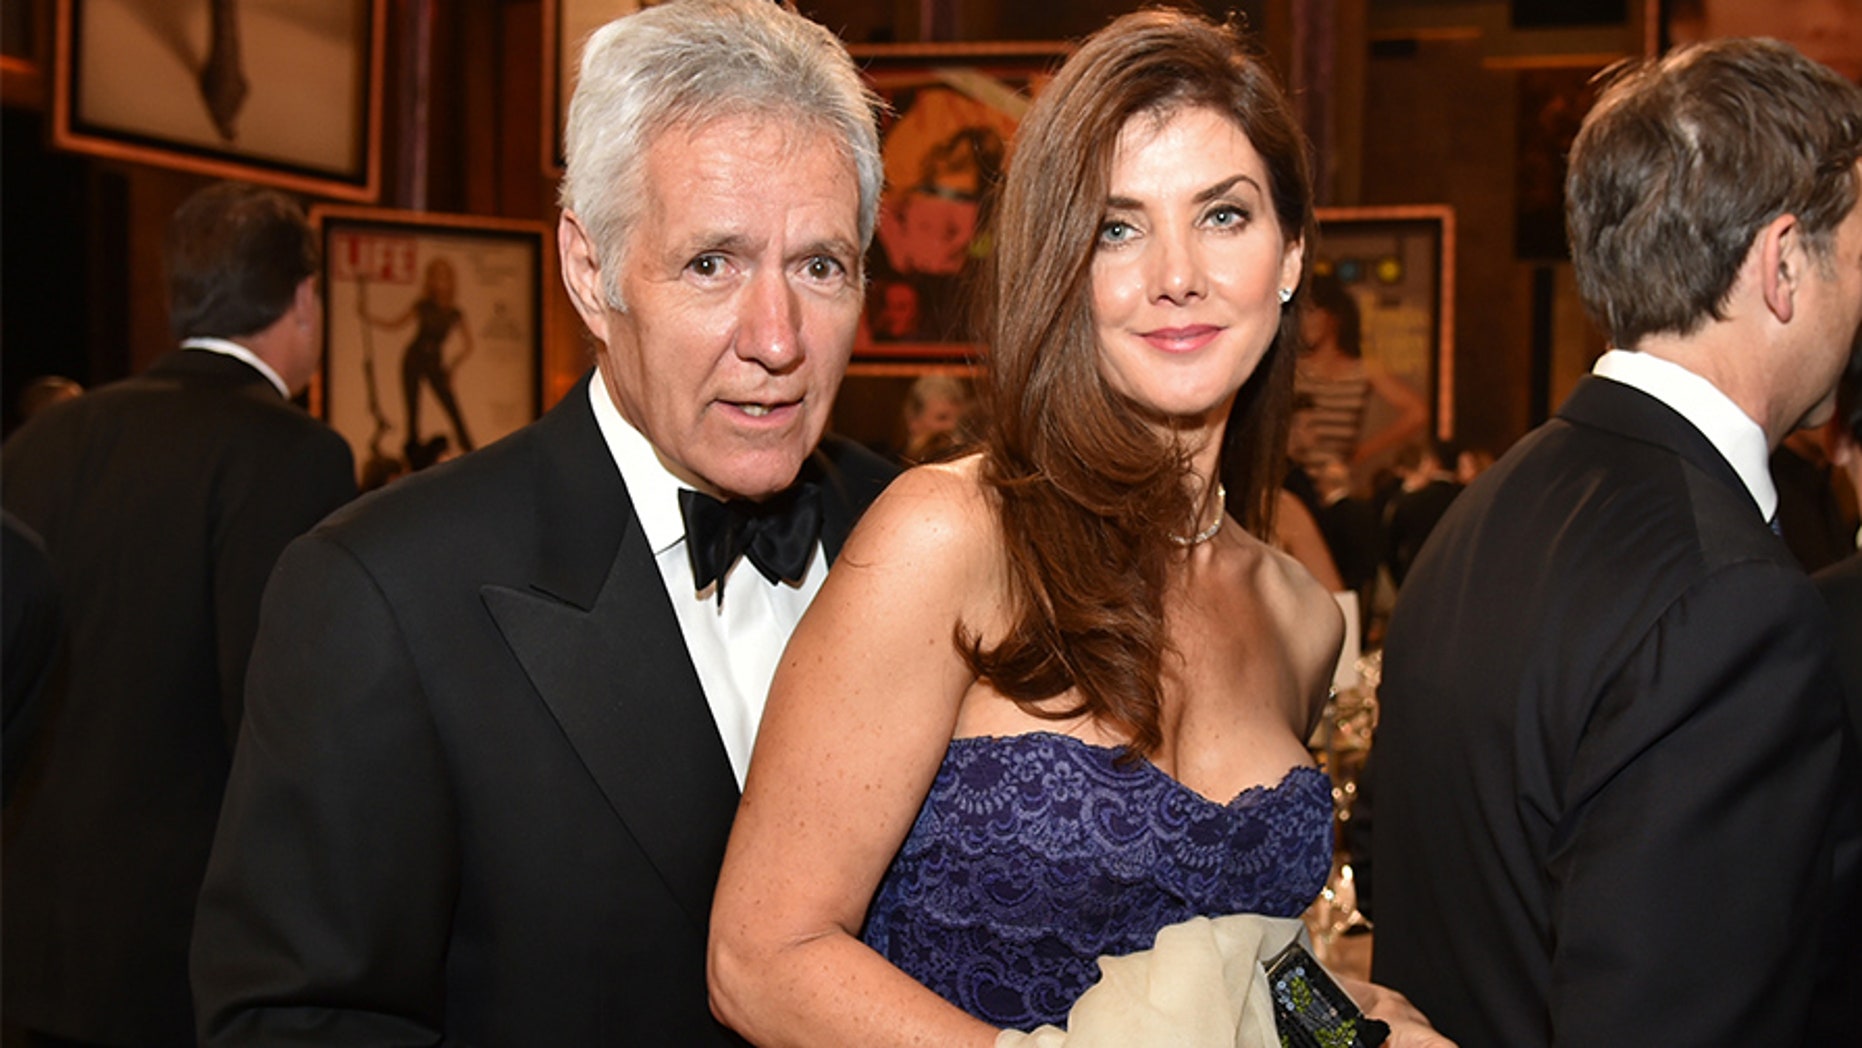 Jeopardy host Alex Trebek opens up about his longtime marriage image